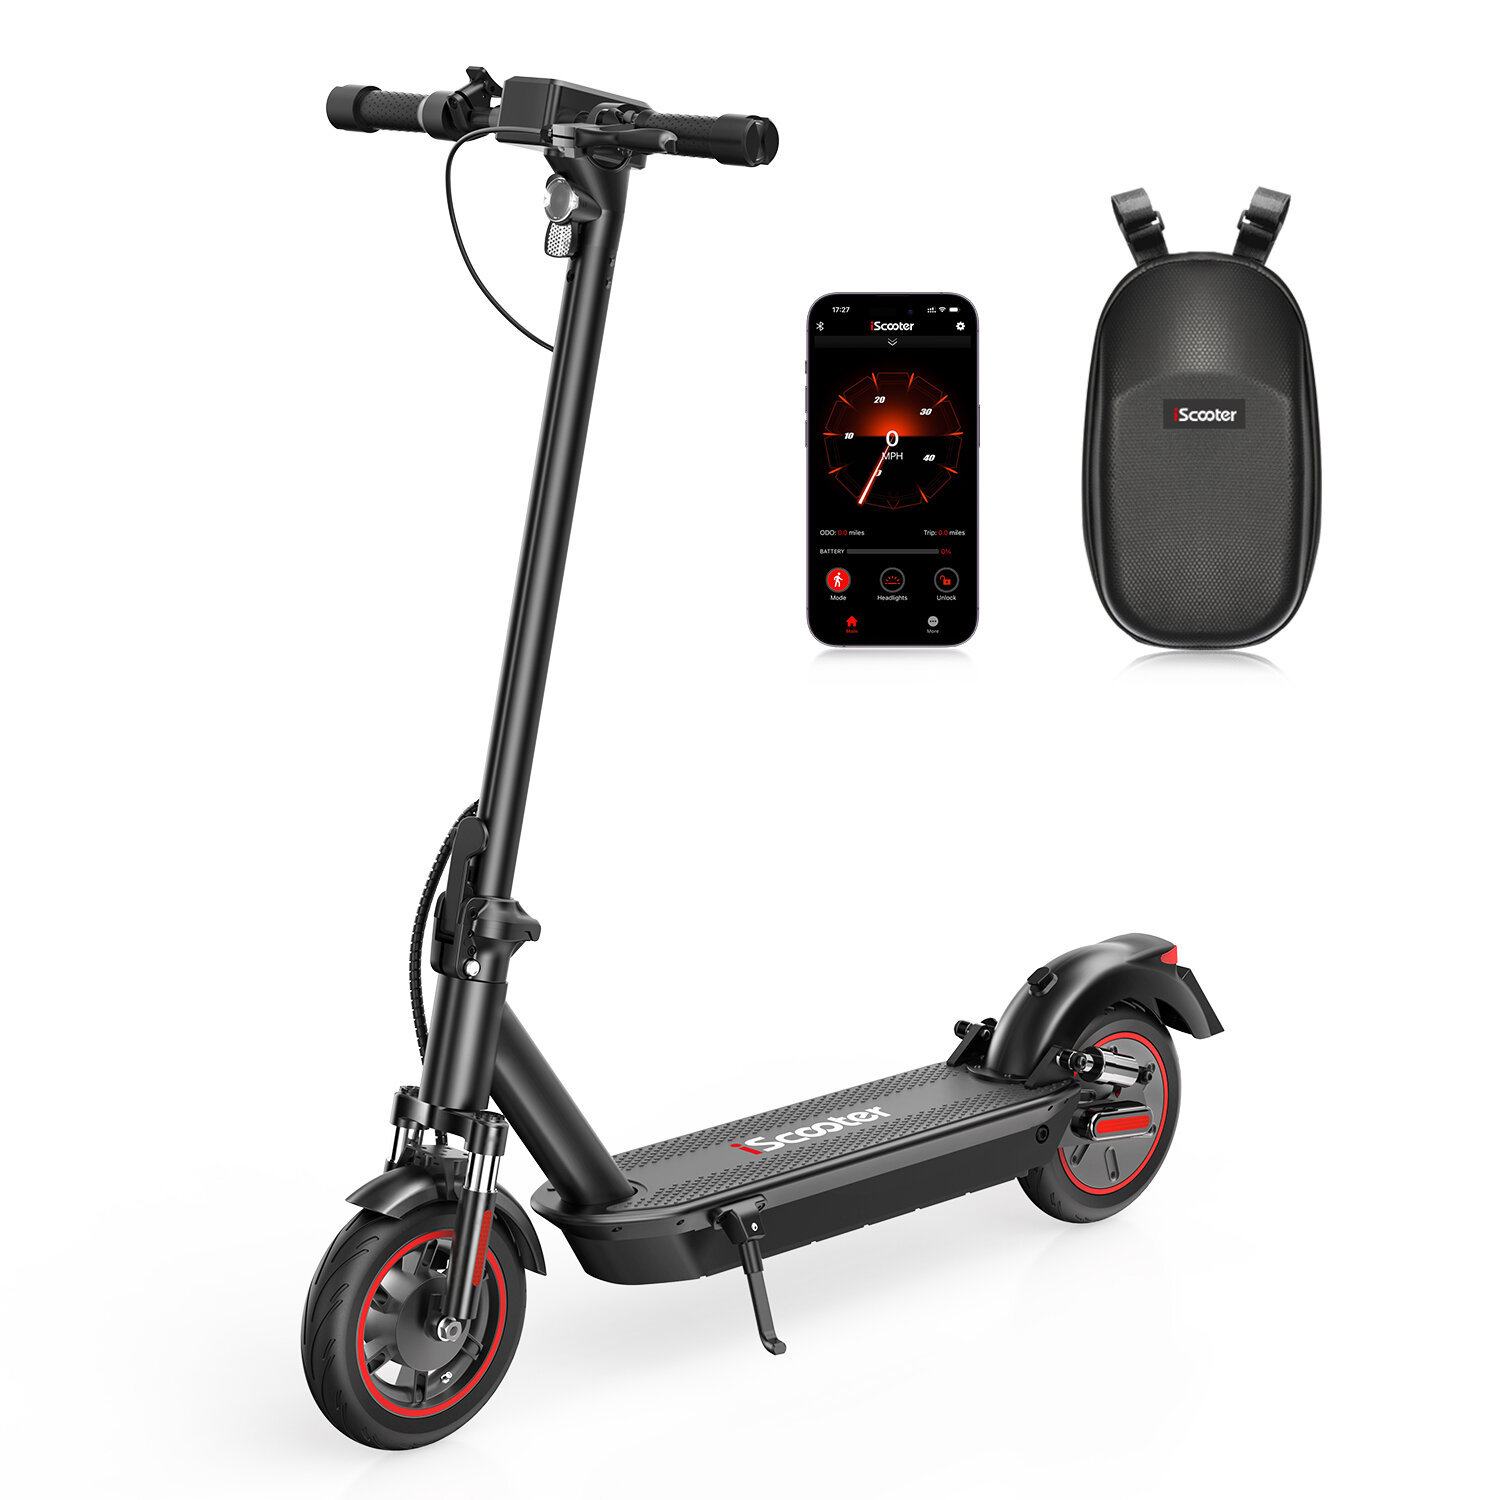 best price,iscooter,i10max,electric,scooter,15.6ah,48v,750w,10inch,eu,coupon,price,discount